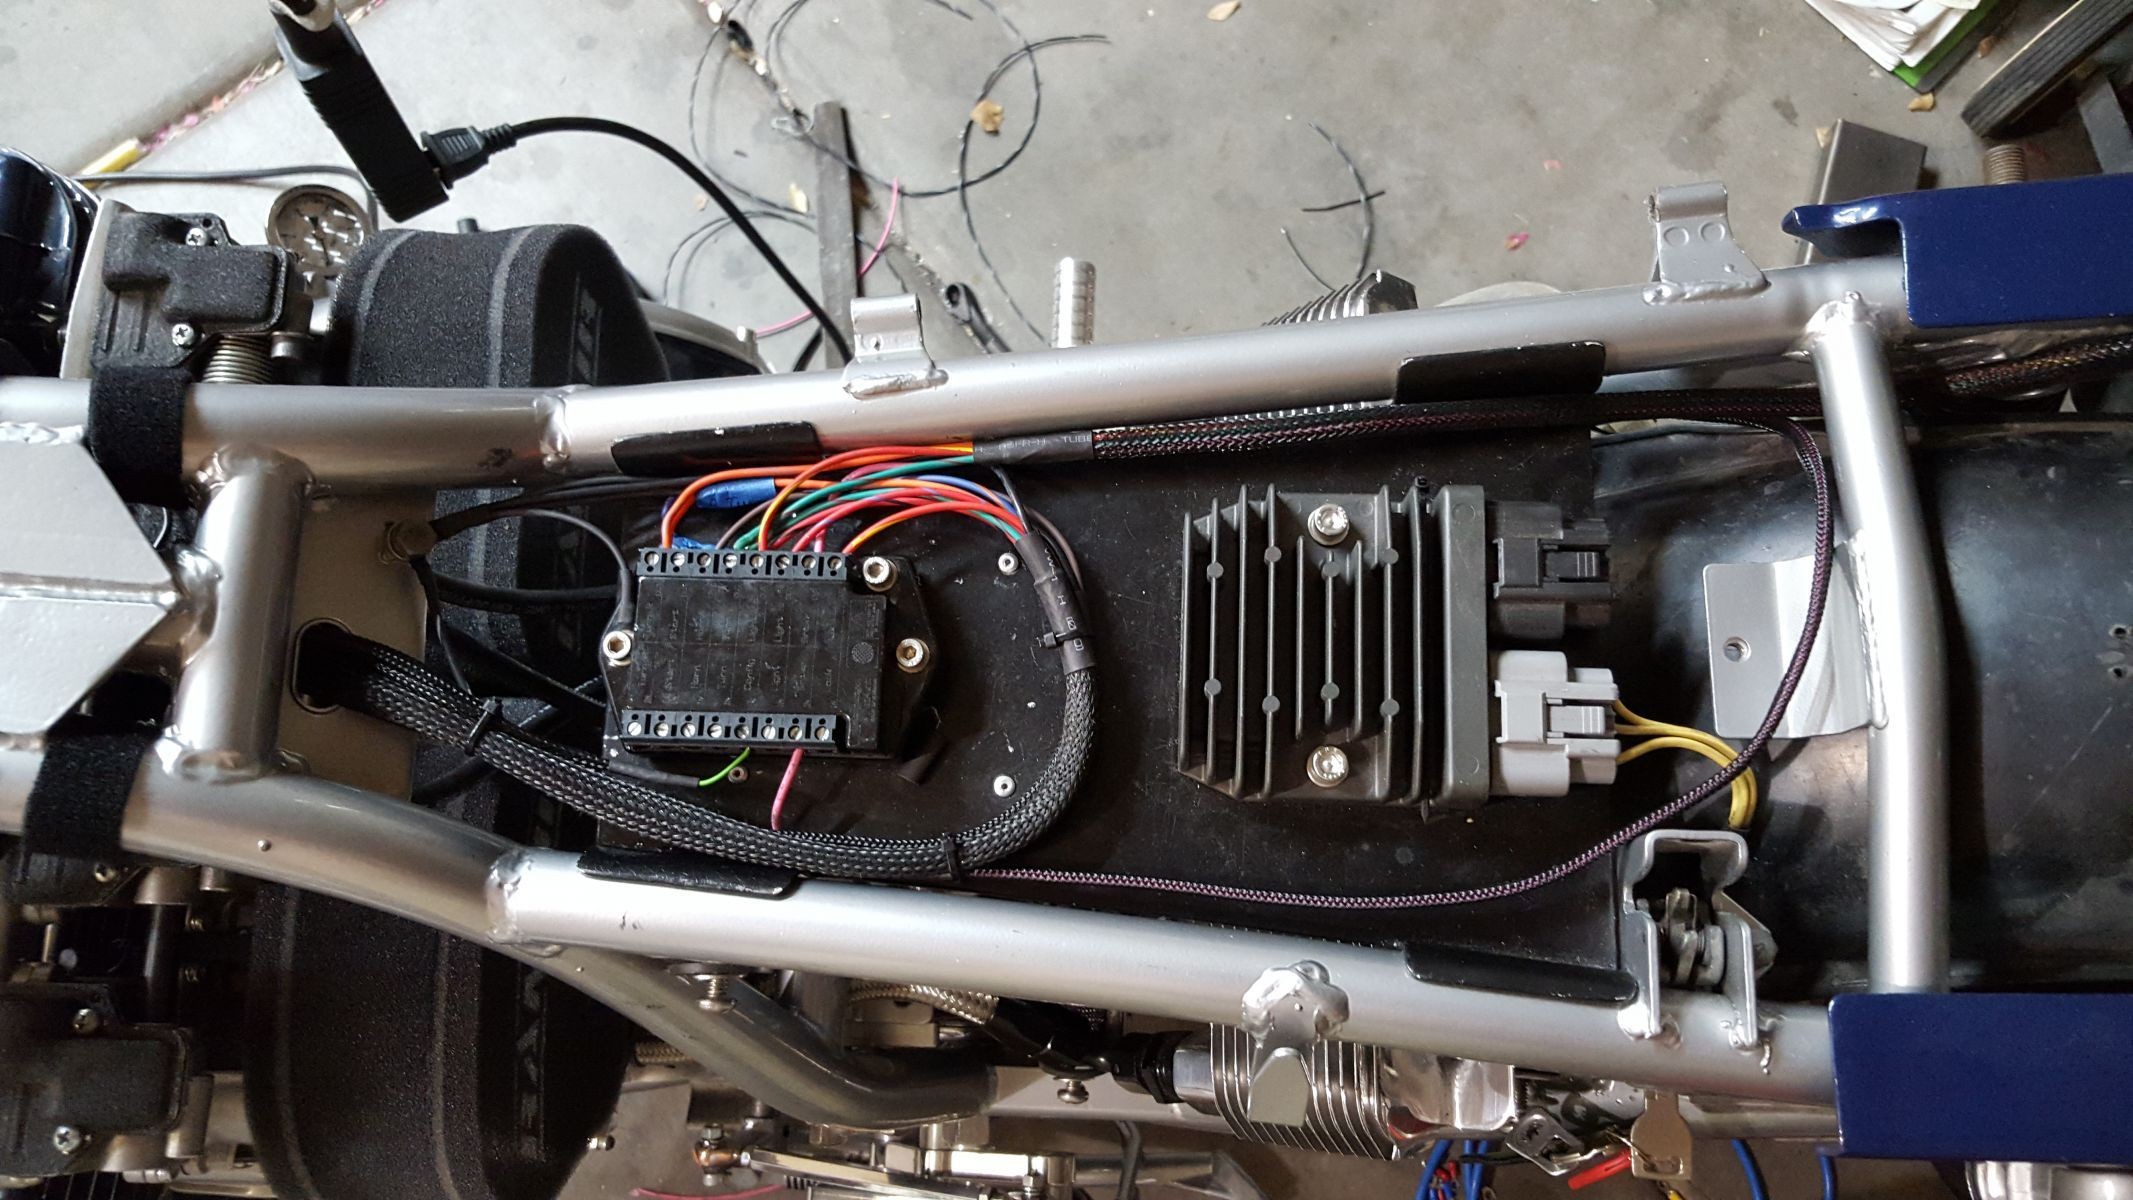 KZrider example of wiring · Motorcycle